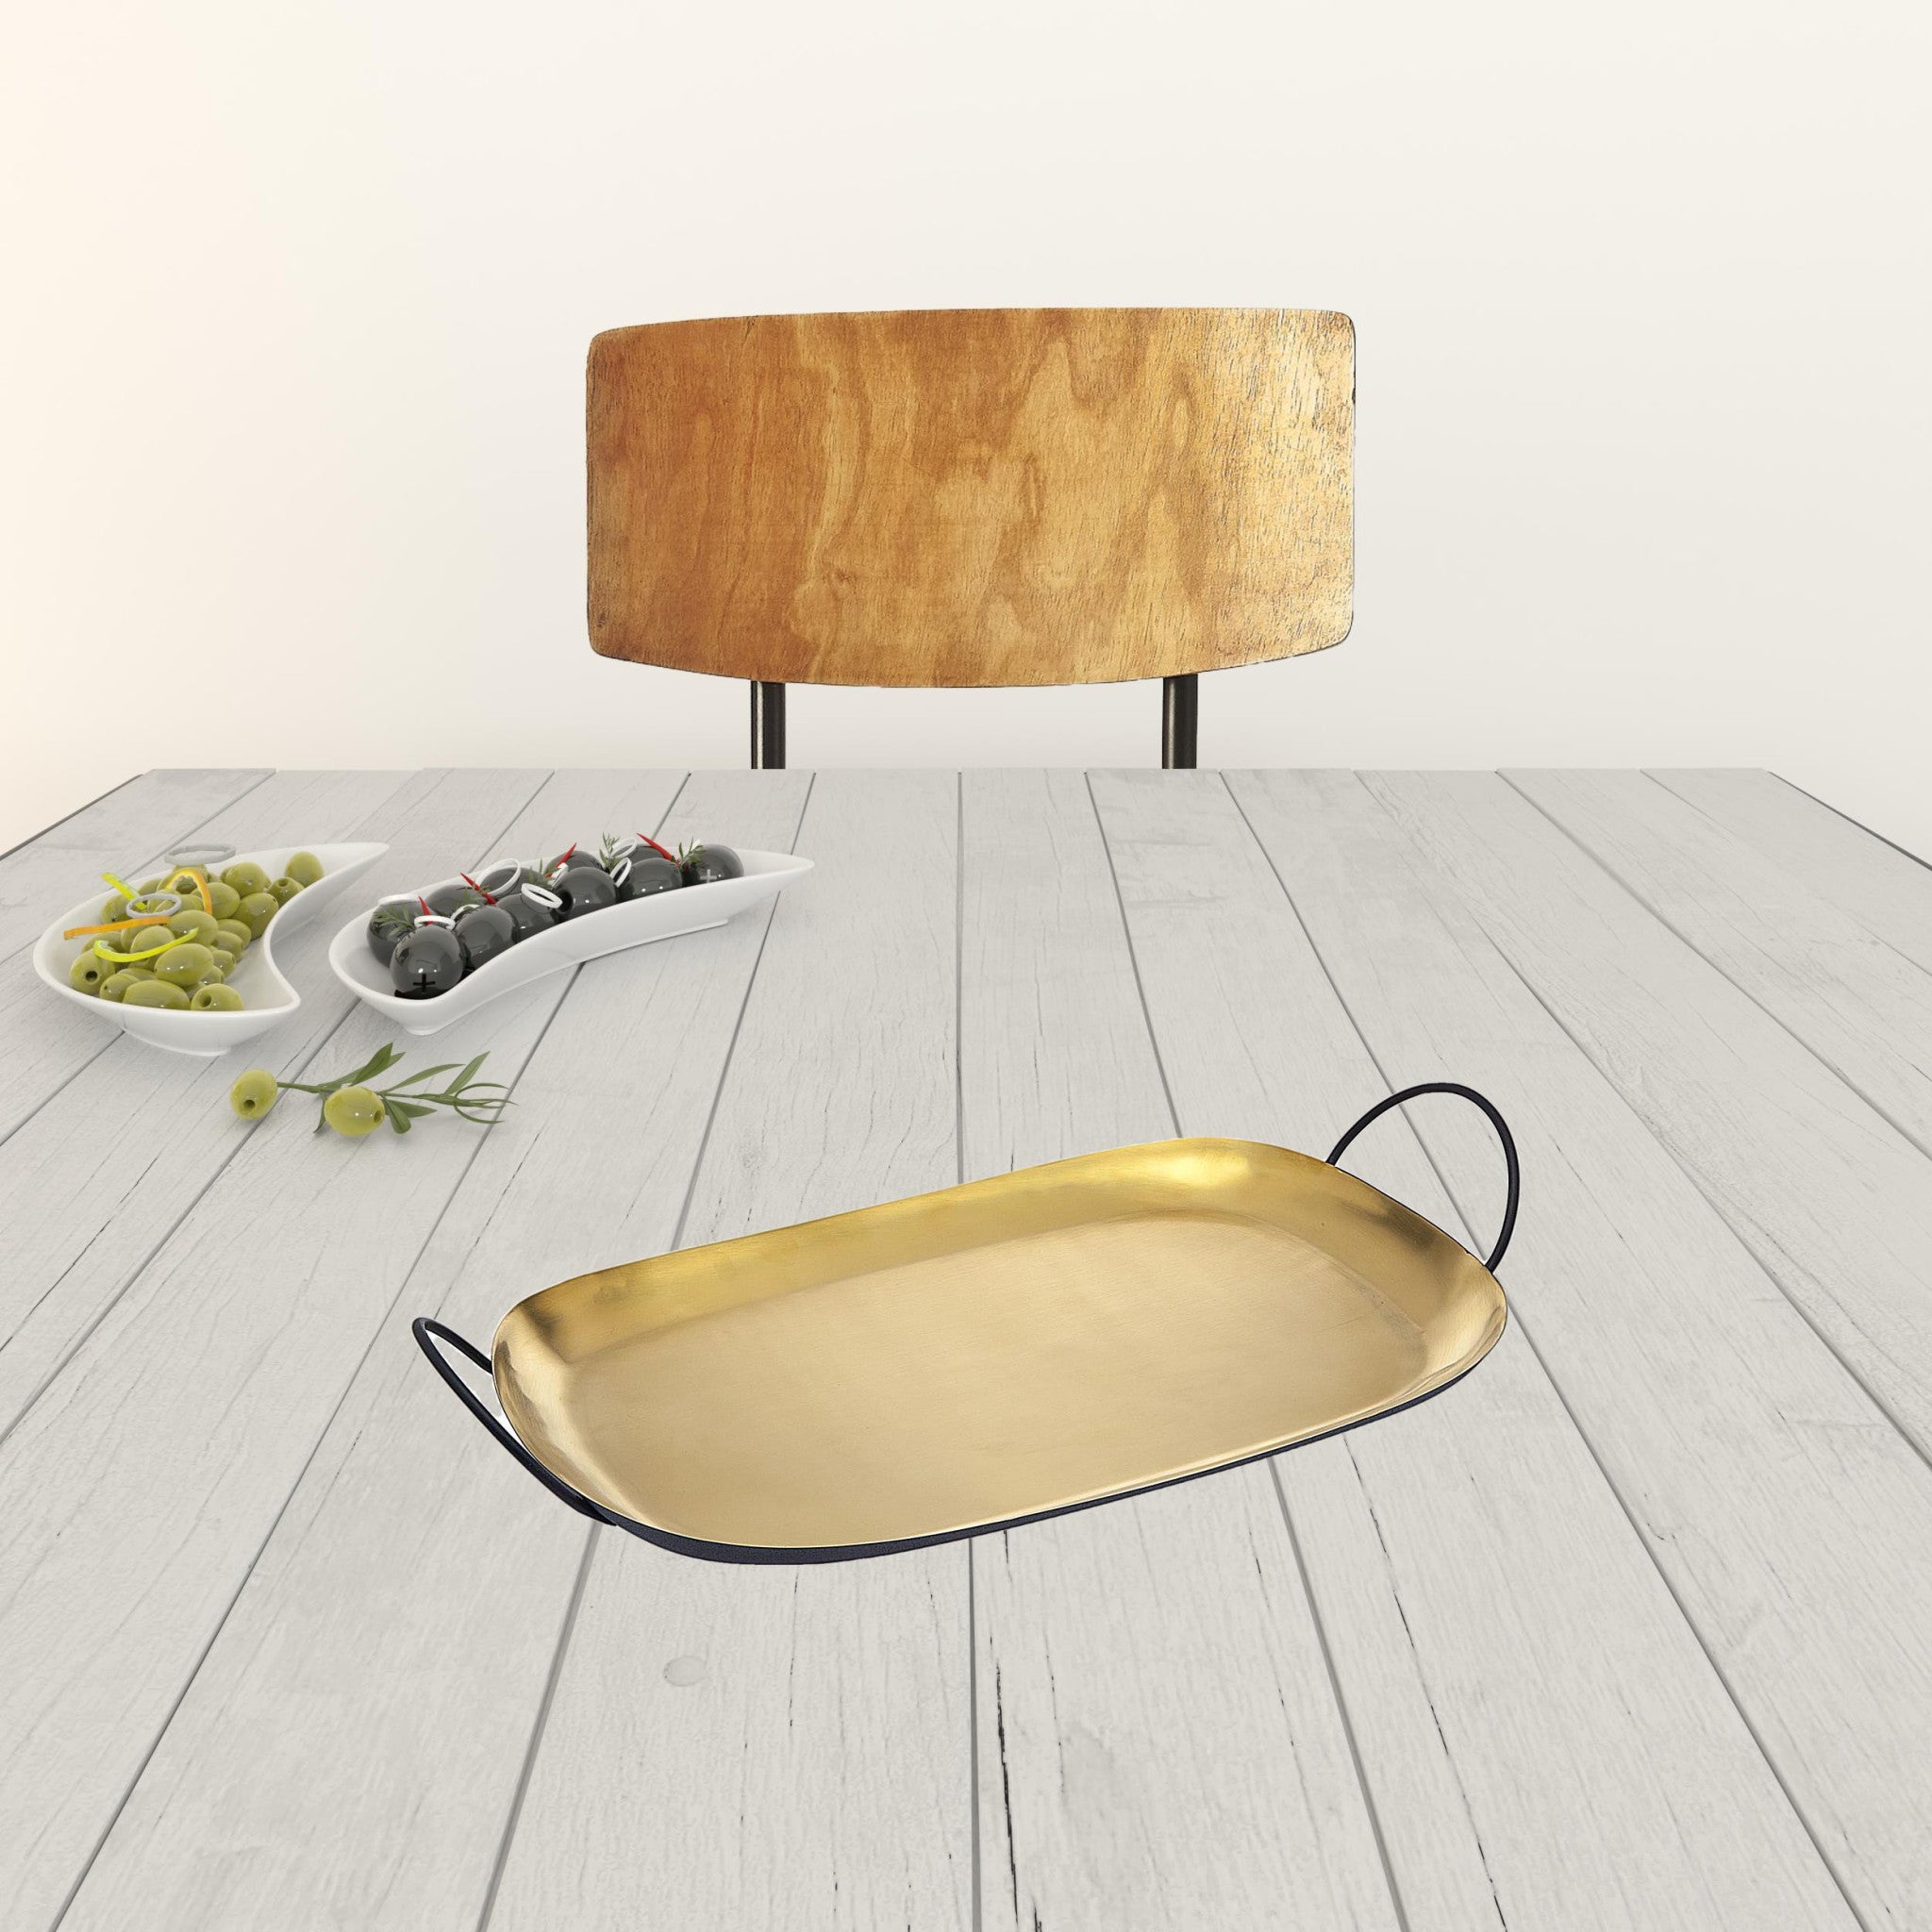 20" Gold Rectangular Stainless Steel Serving Tray With Handles